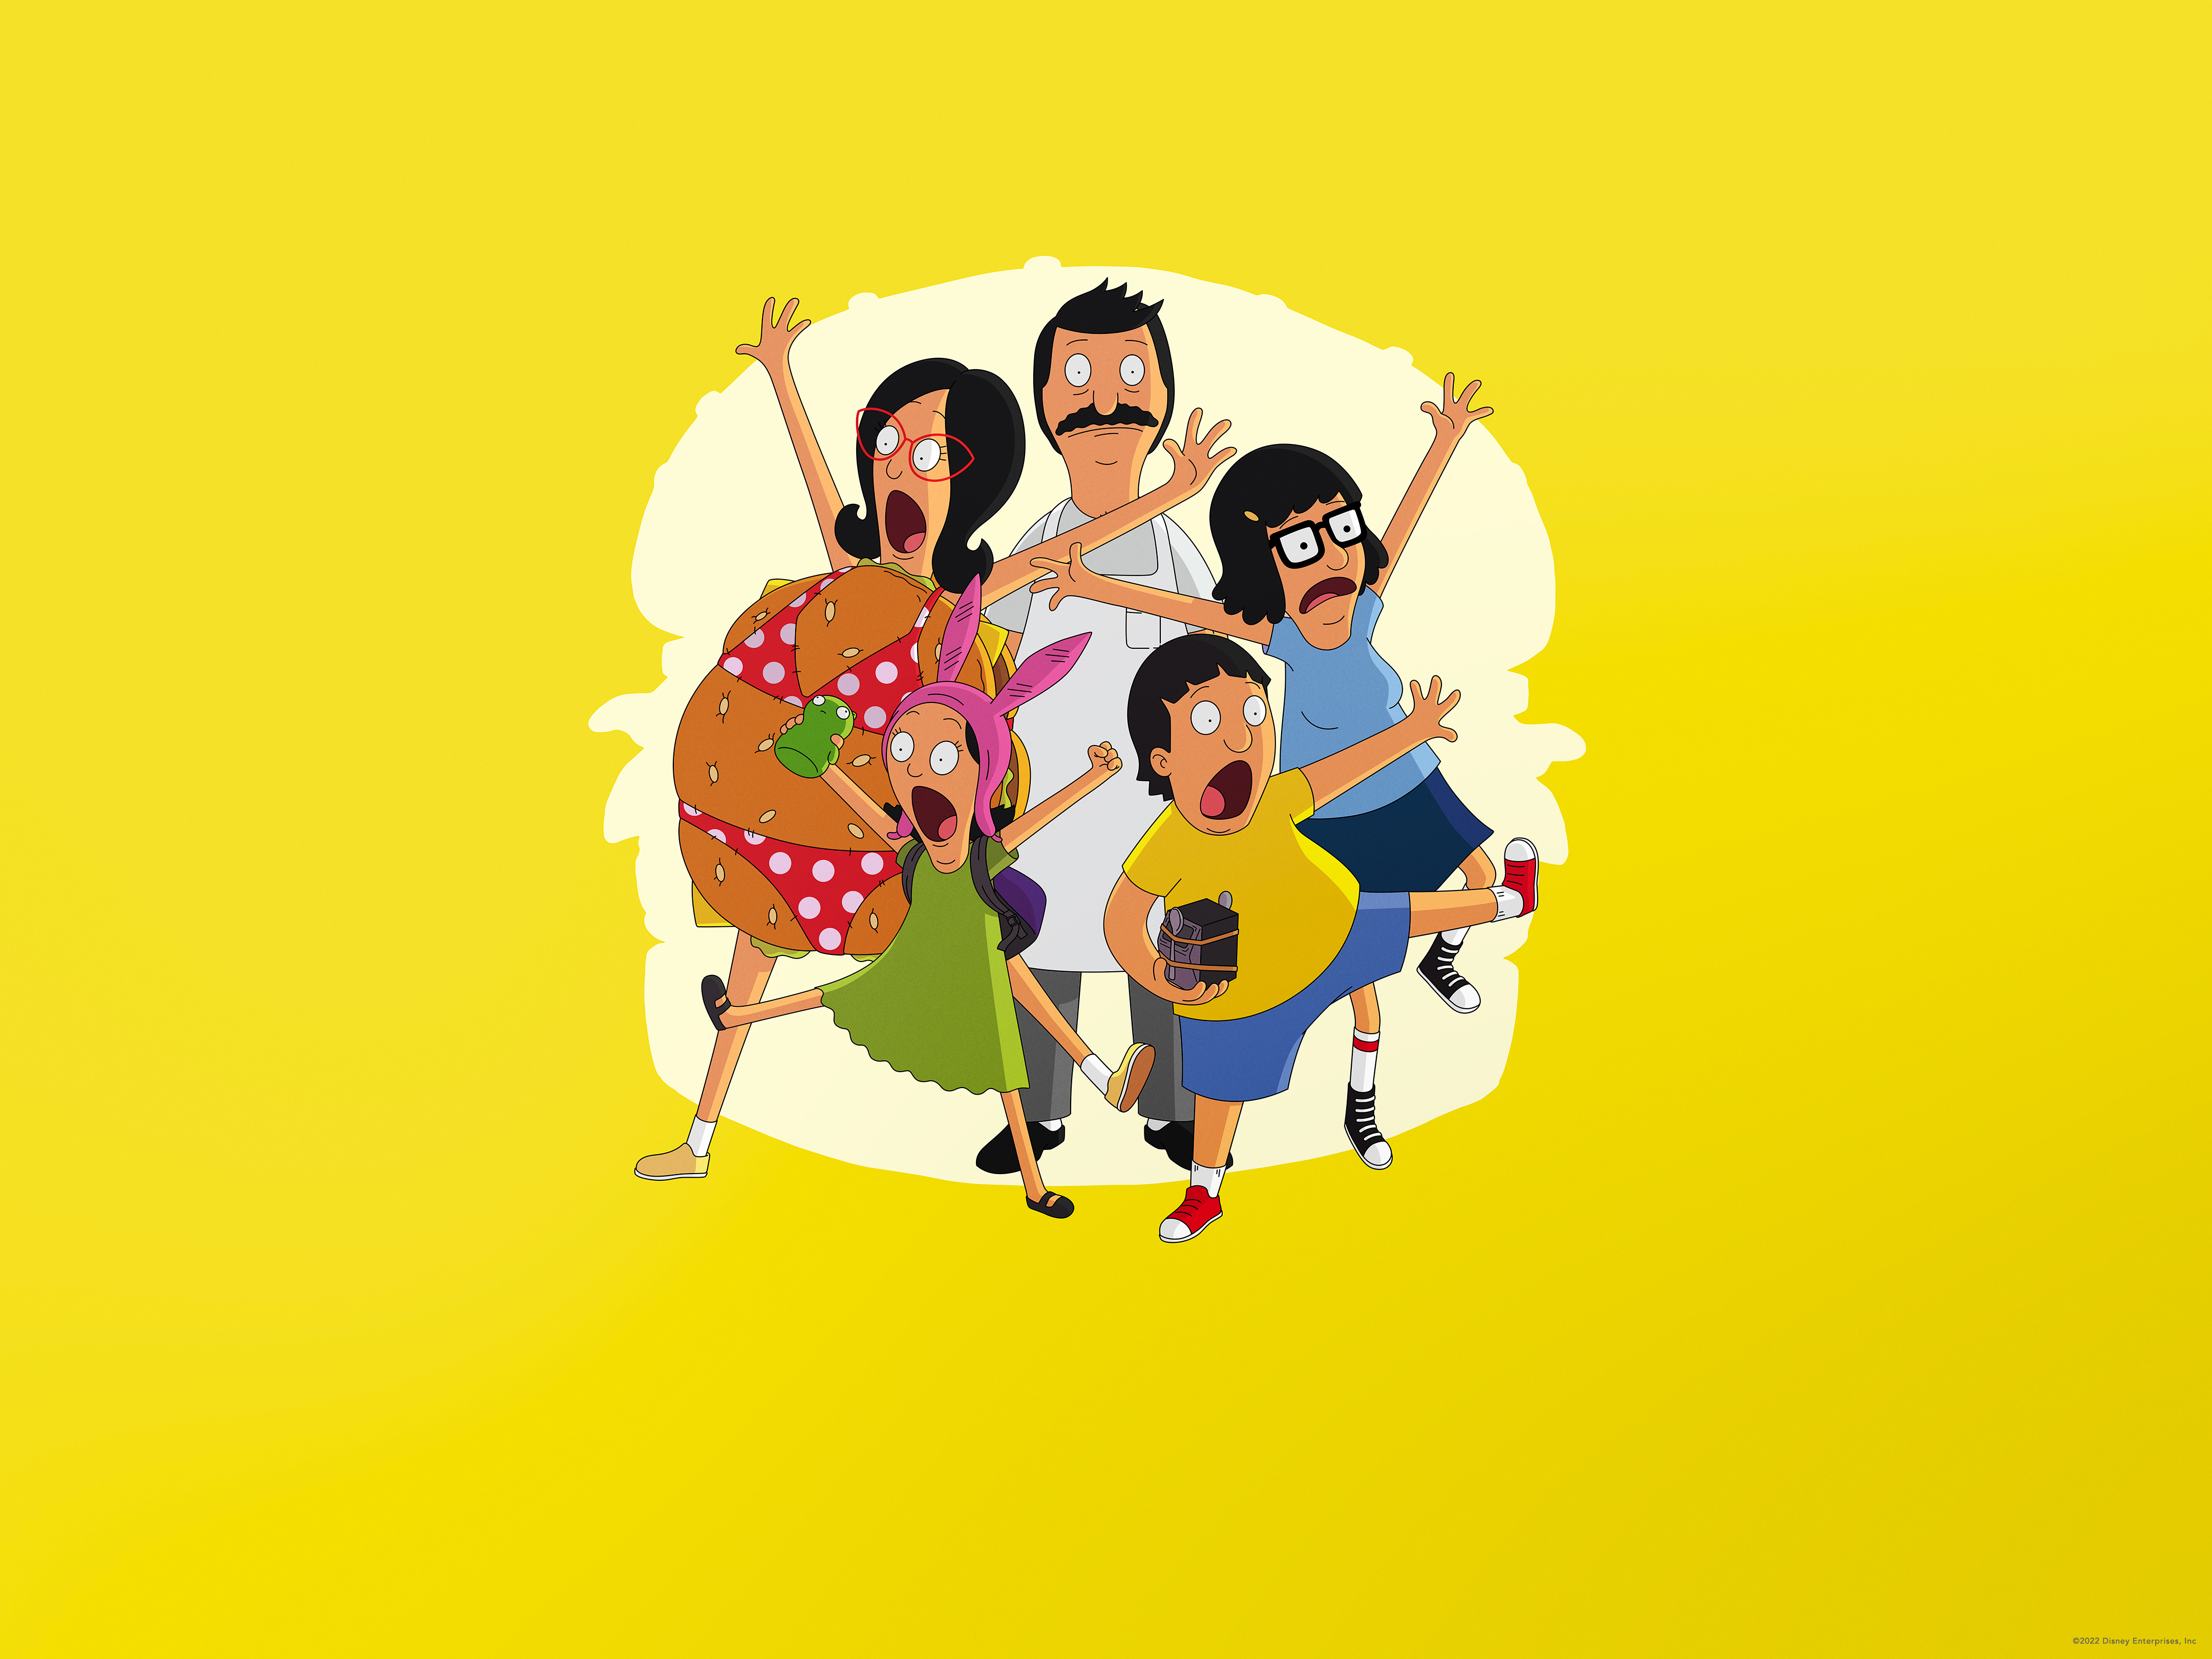 20 The Bobs Burgers Movie HD Wallpapers and Backgrounds